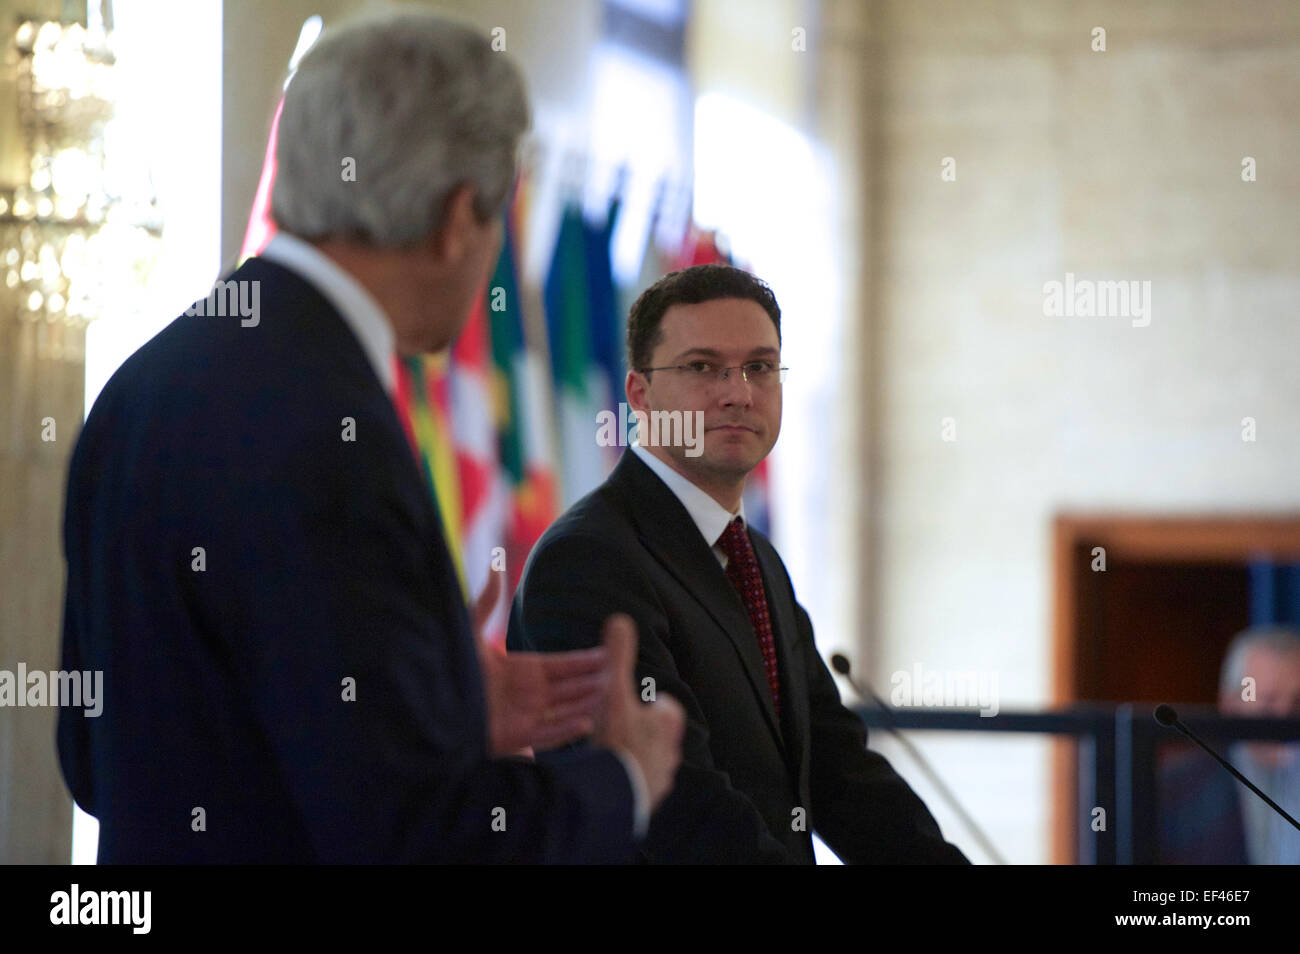 U.S. Secretary of State John Kerry thanks Bulgarian Foreign Minister Daniel Mitov for his hospitality as the deliver statements to reporters after sharing a working lunch on January 15, 2015, at the Ministry of Foreign Affairs in Sofia, Bulgaria. Stock Photo